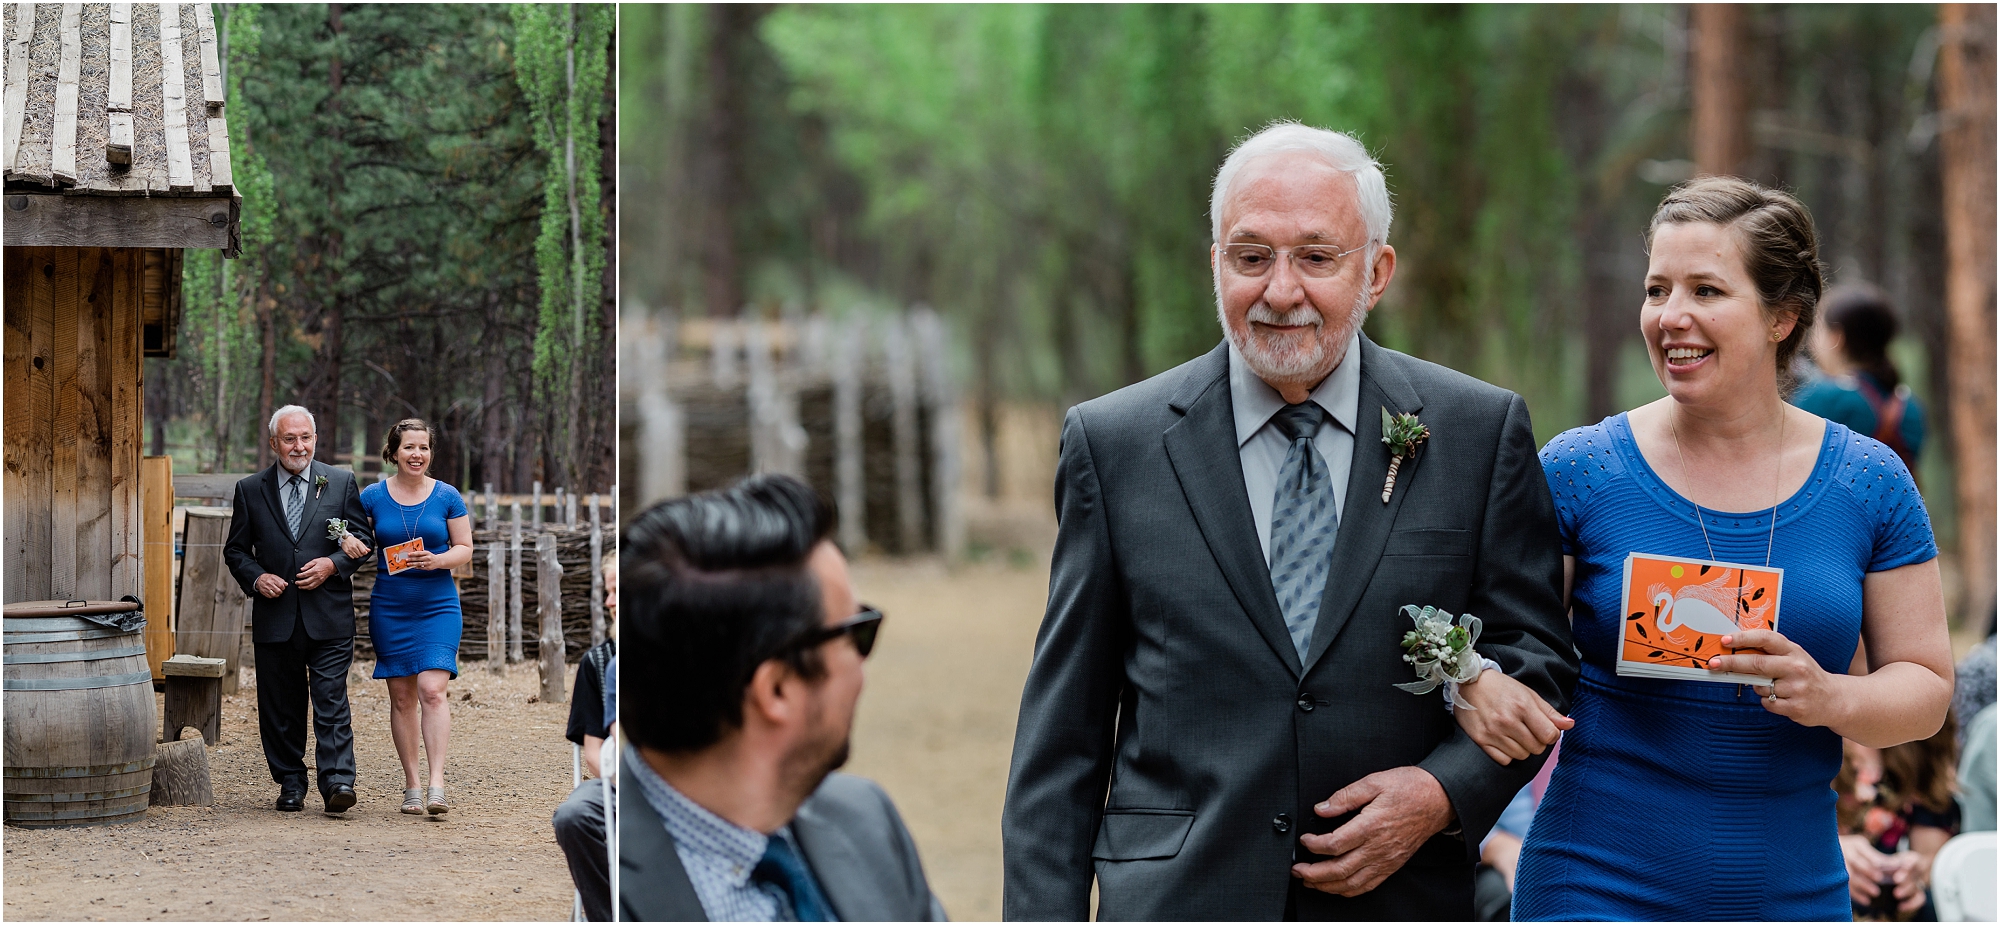 The wedding processional begins with the grandfather and the officiant, a family member, walk down the aisle to the rustic cabin alter at this museum wedding venue in Bend, OR. | Erica Swantek Photography